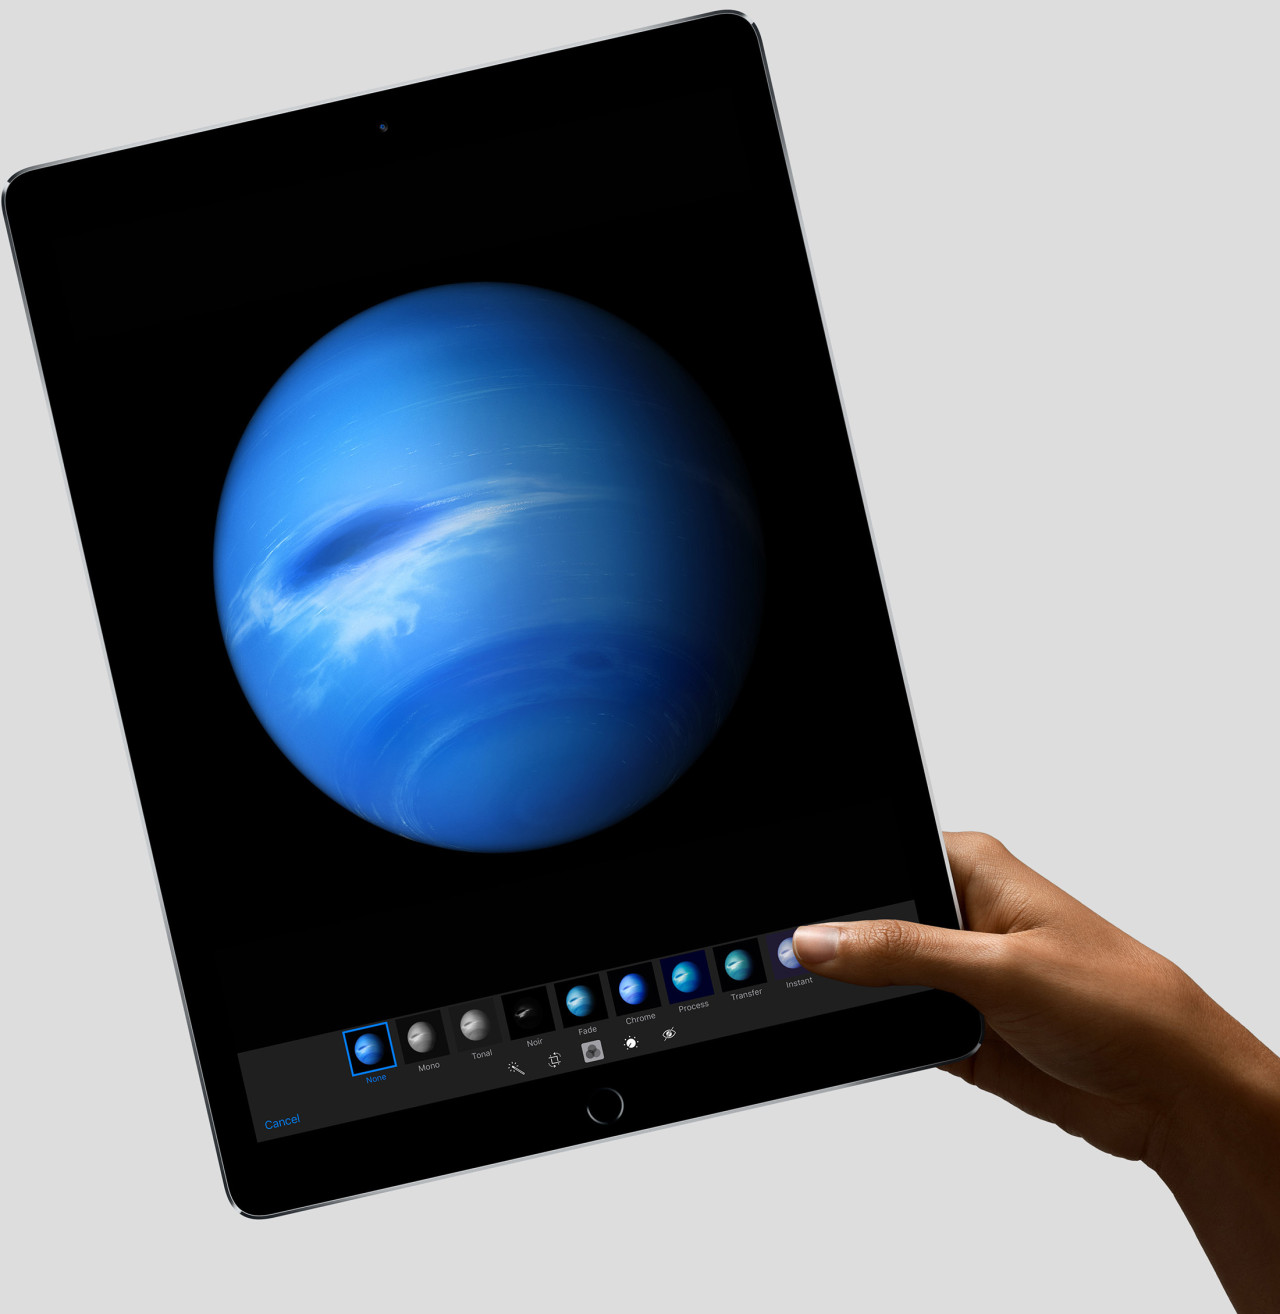 Hands On With the iPad Pro and In the Hands of the Creative